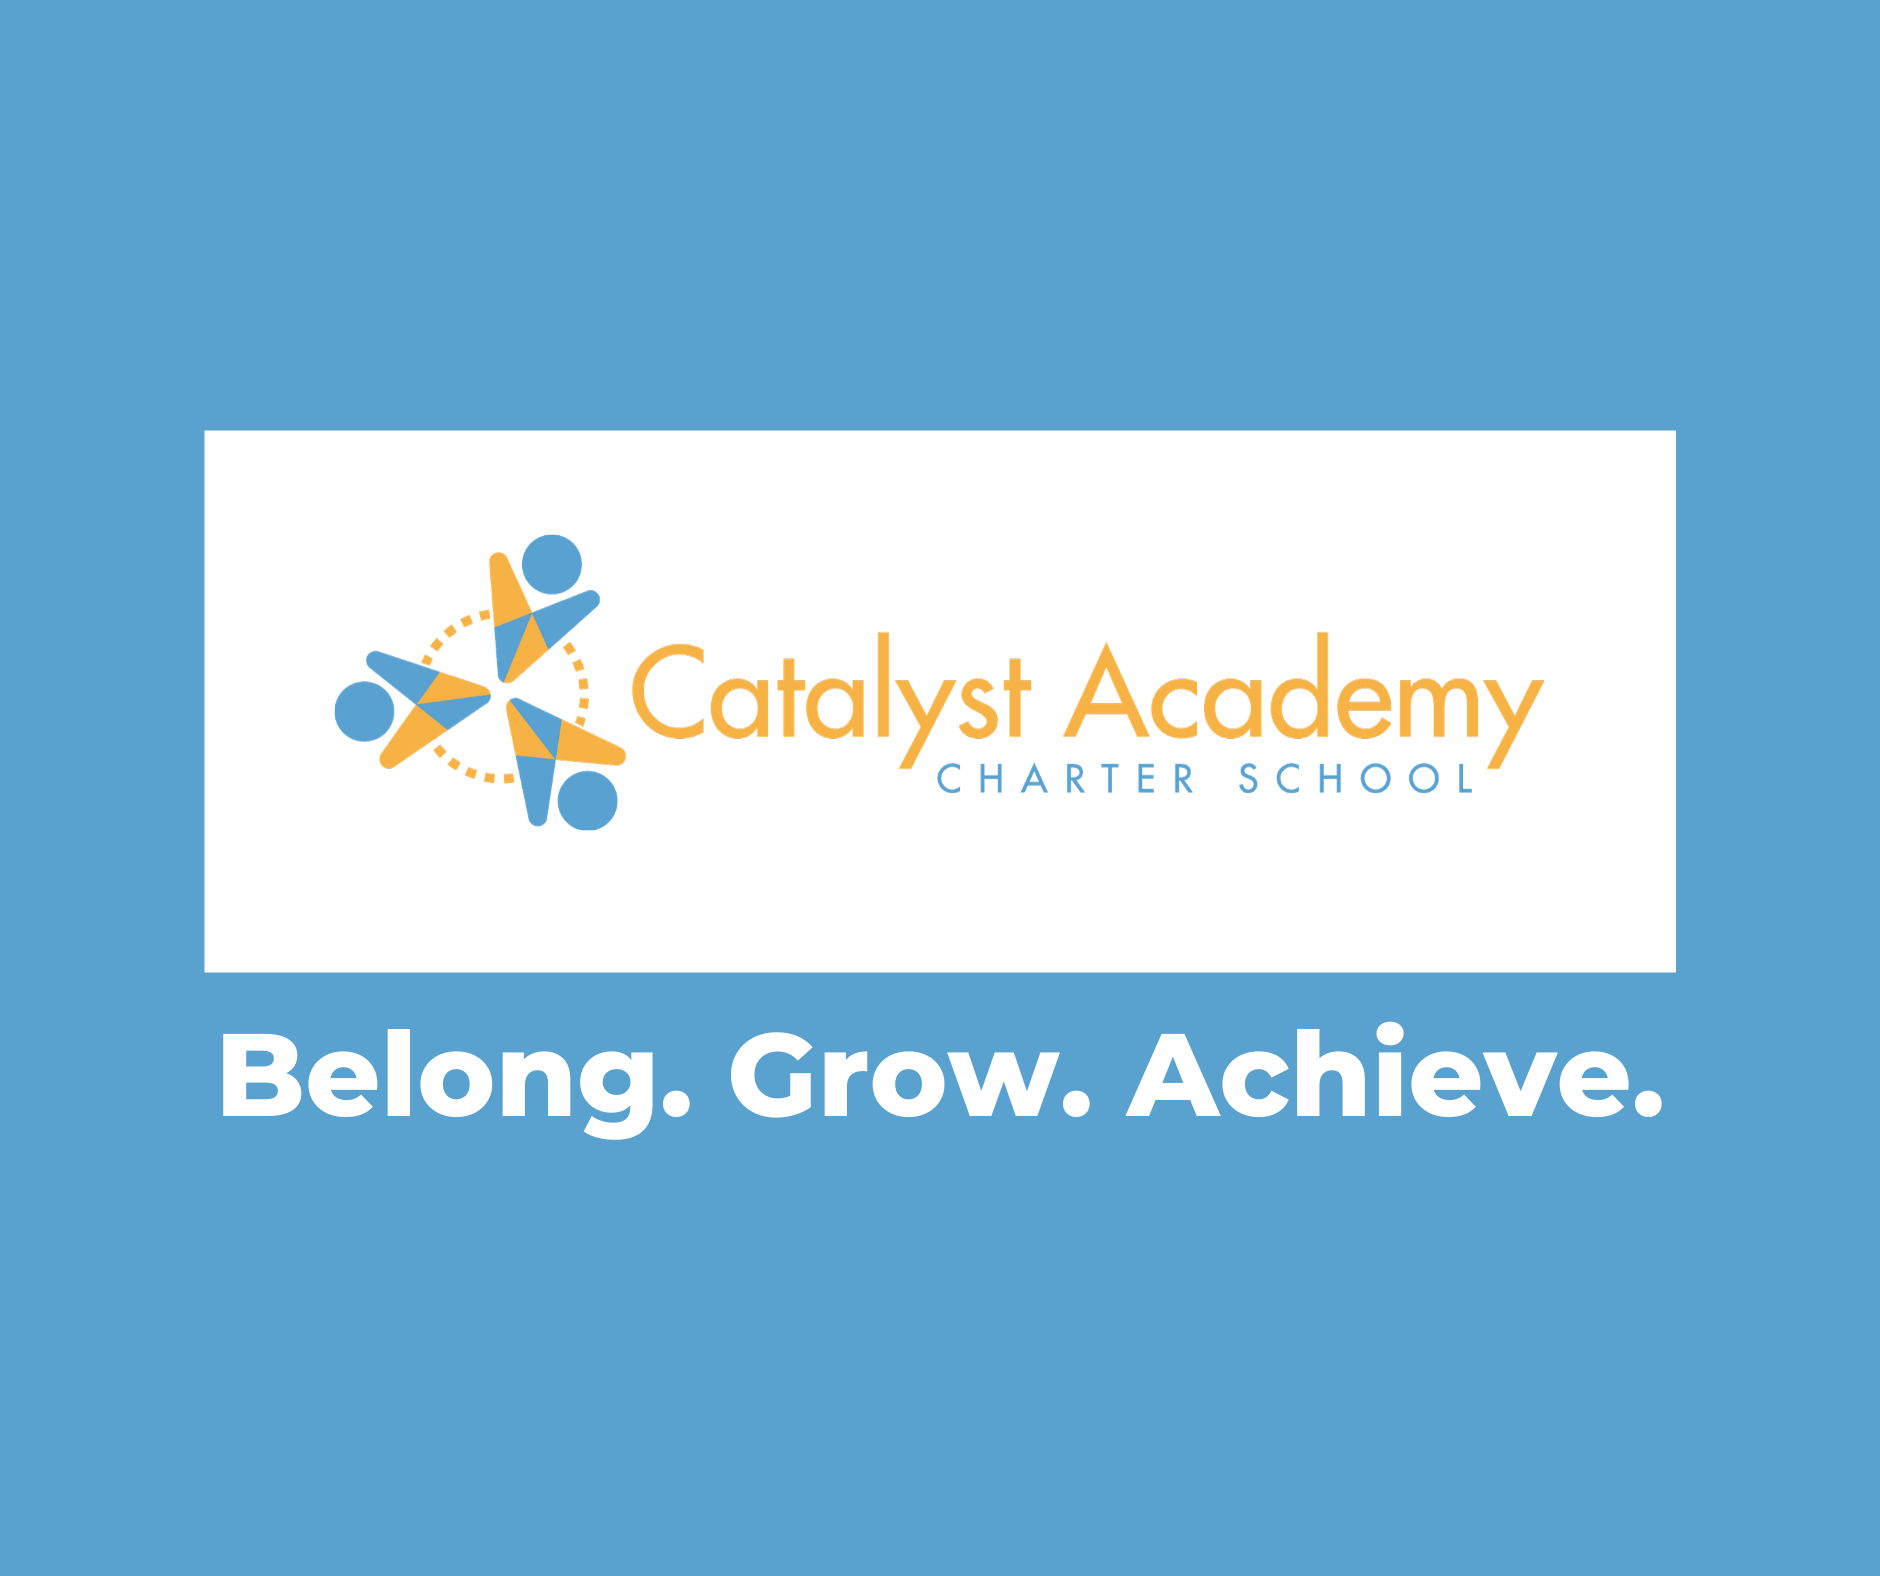 Catalyst Academy TuitionFree K8 Public Charter School in Pittsburgh